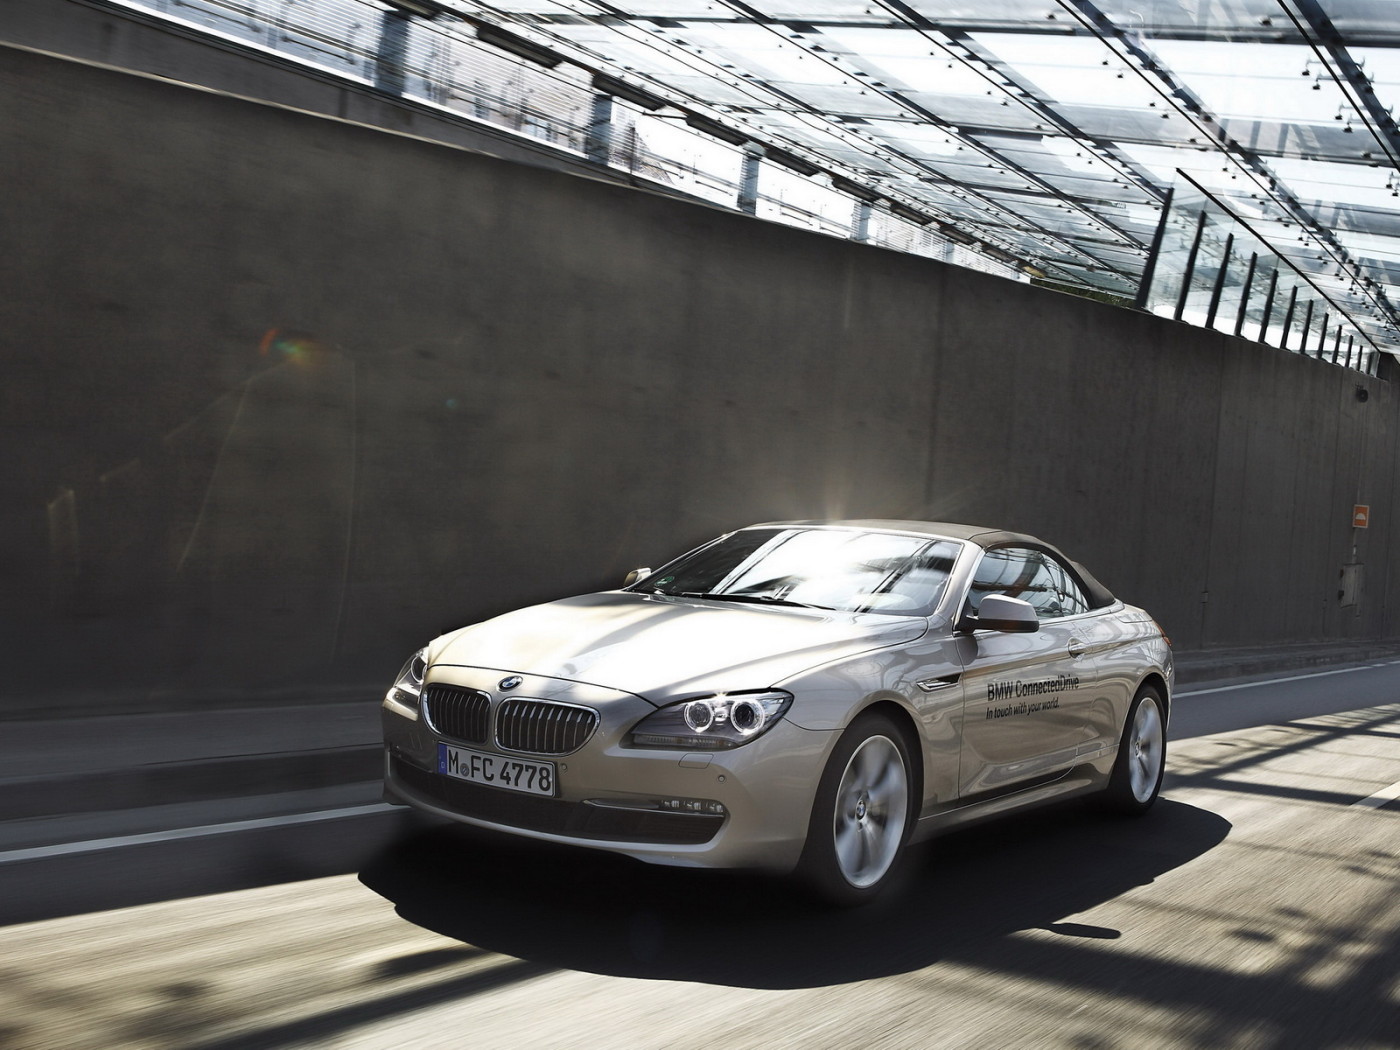 BMW 6 Series Connected Drive